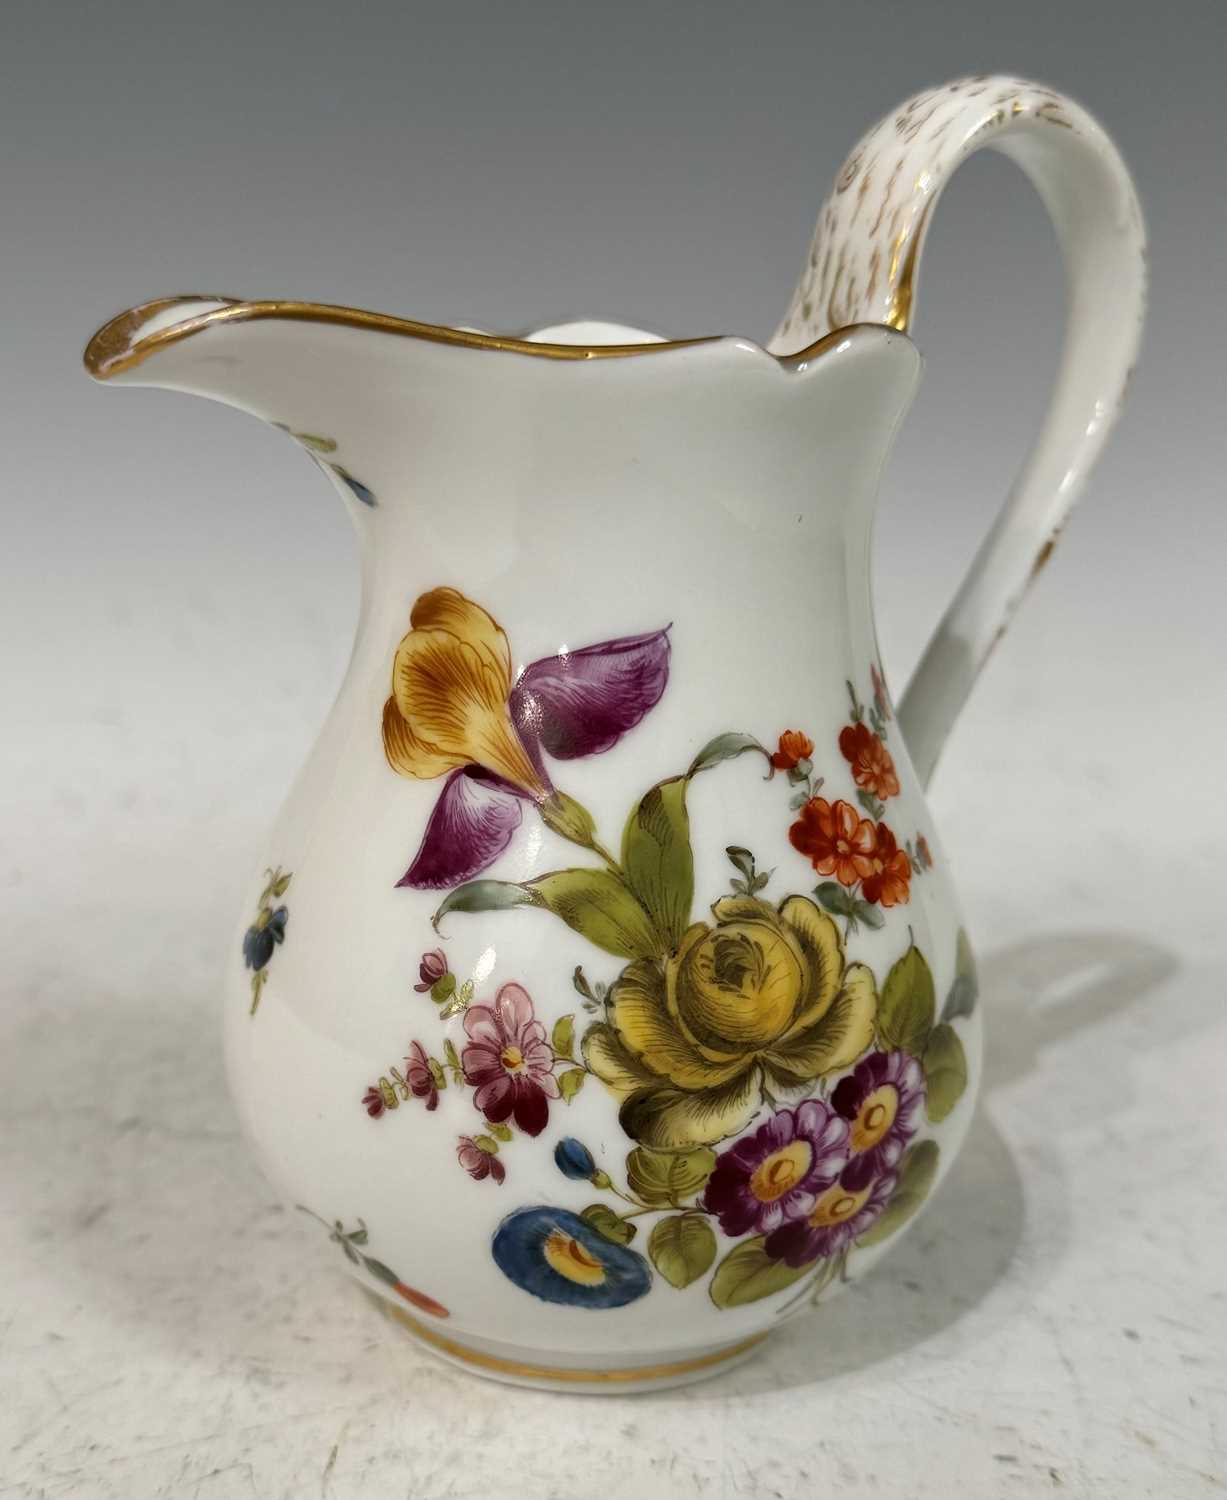 A mid-19th century Meissen style cream jug, with hand painted floral details and gilded accents,